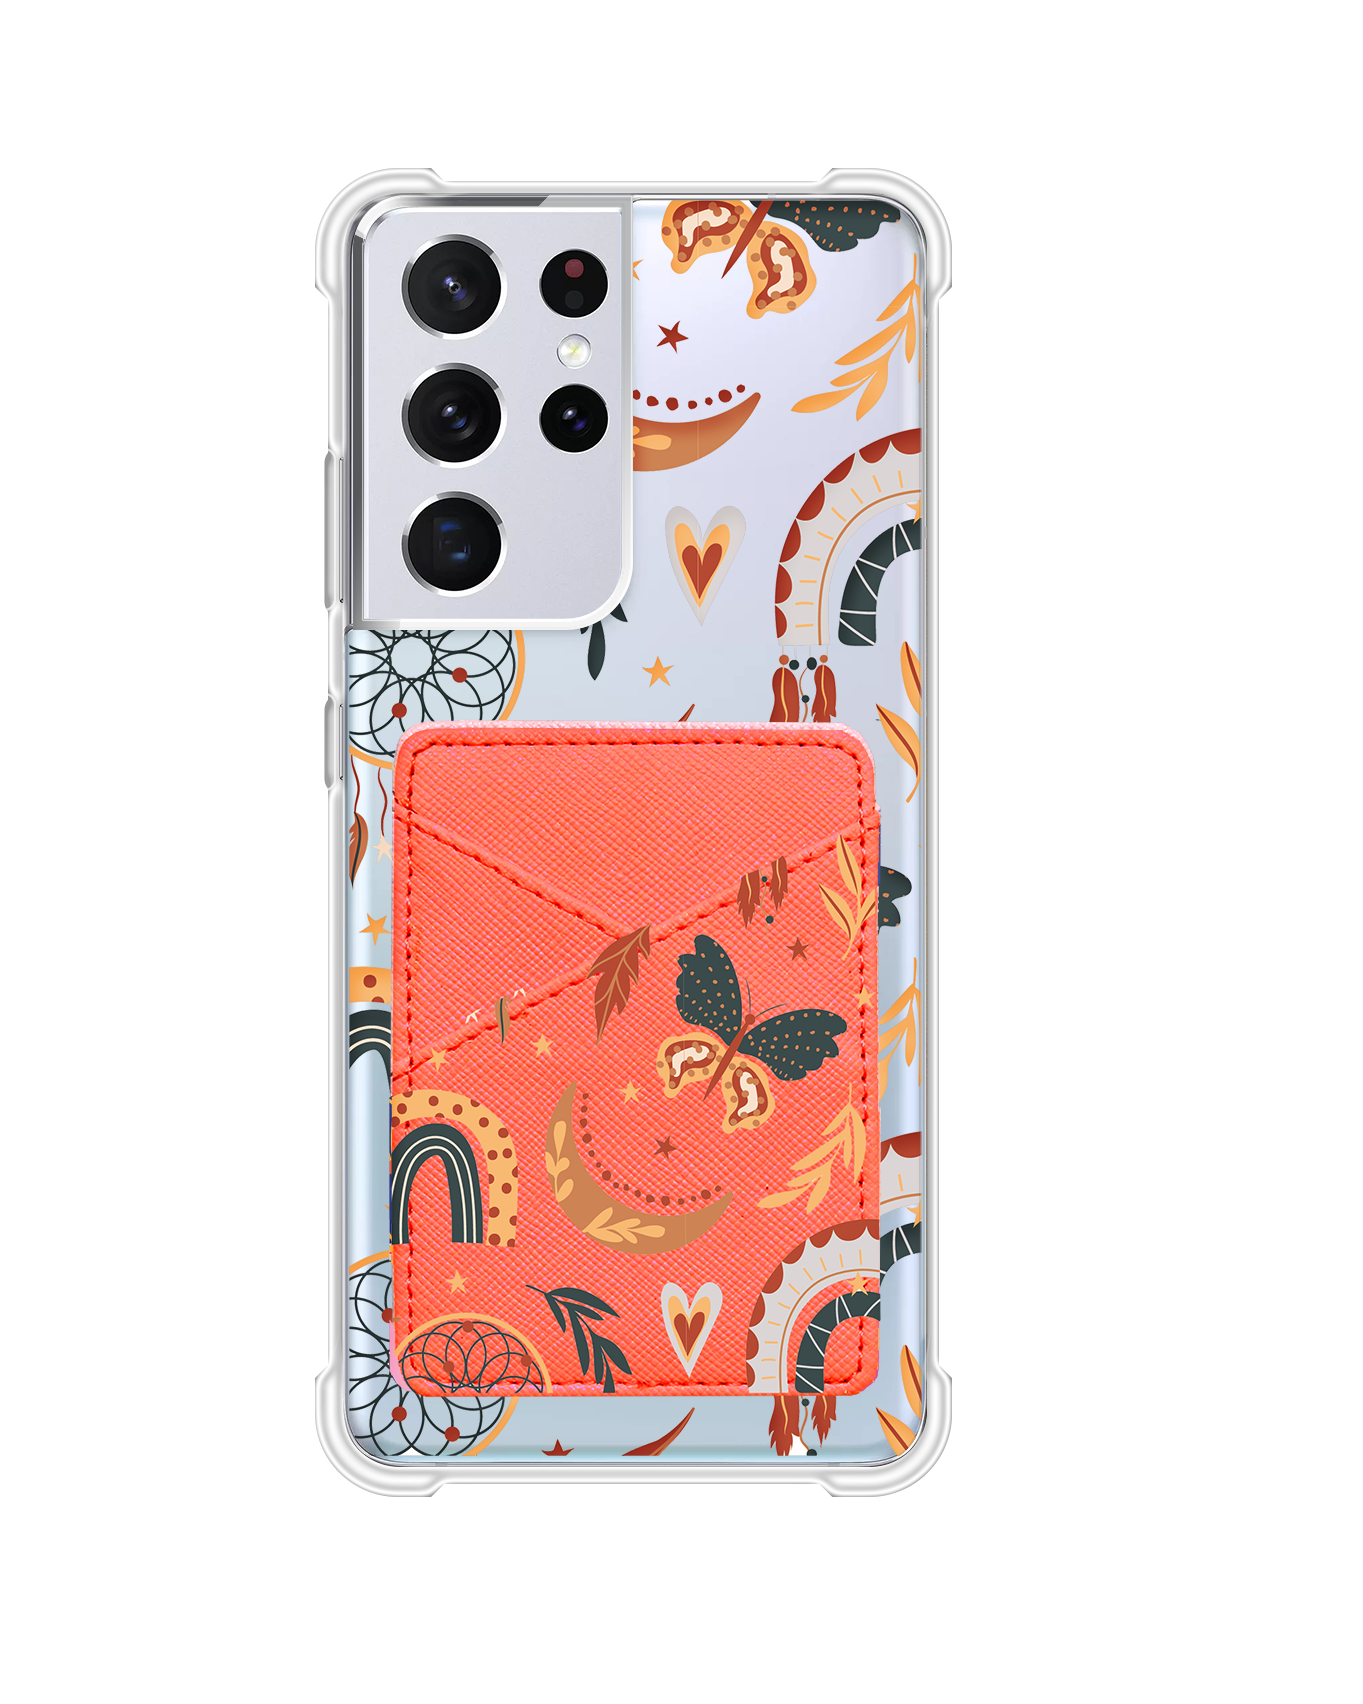 Android Phone Wallet Case - Boho 5.0